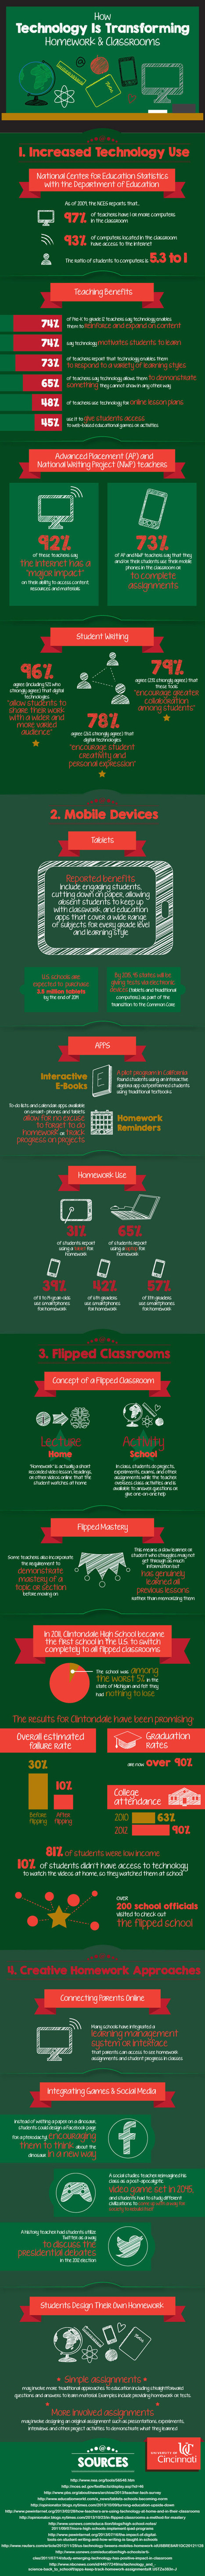 How Technology is Changing the Classroom | Pédagogie & Technologie | Scoop.it